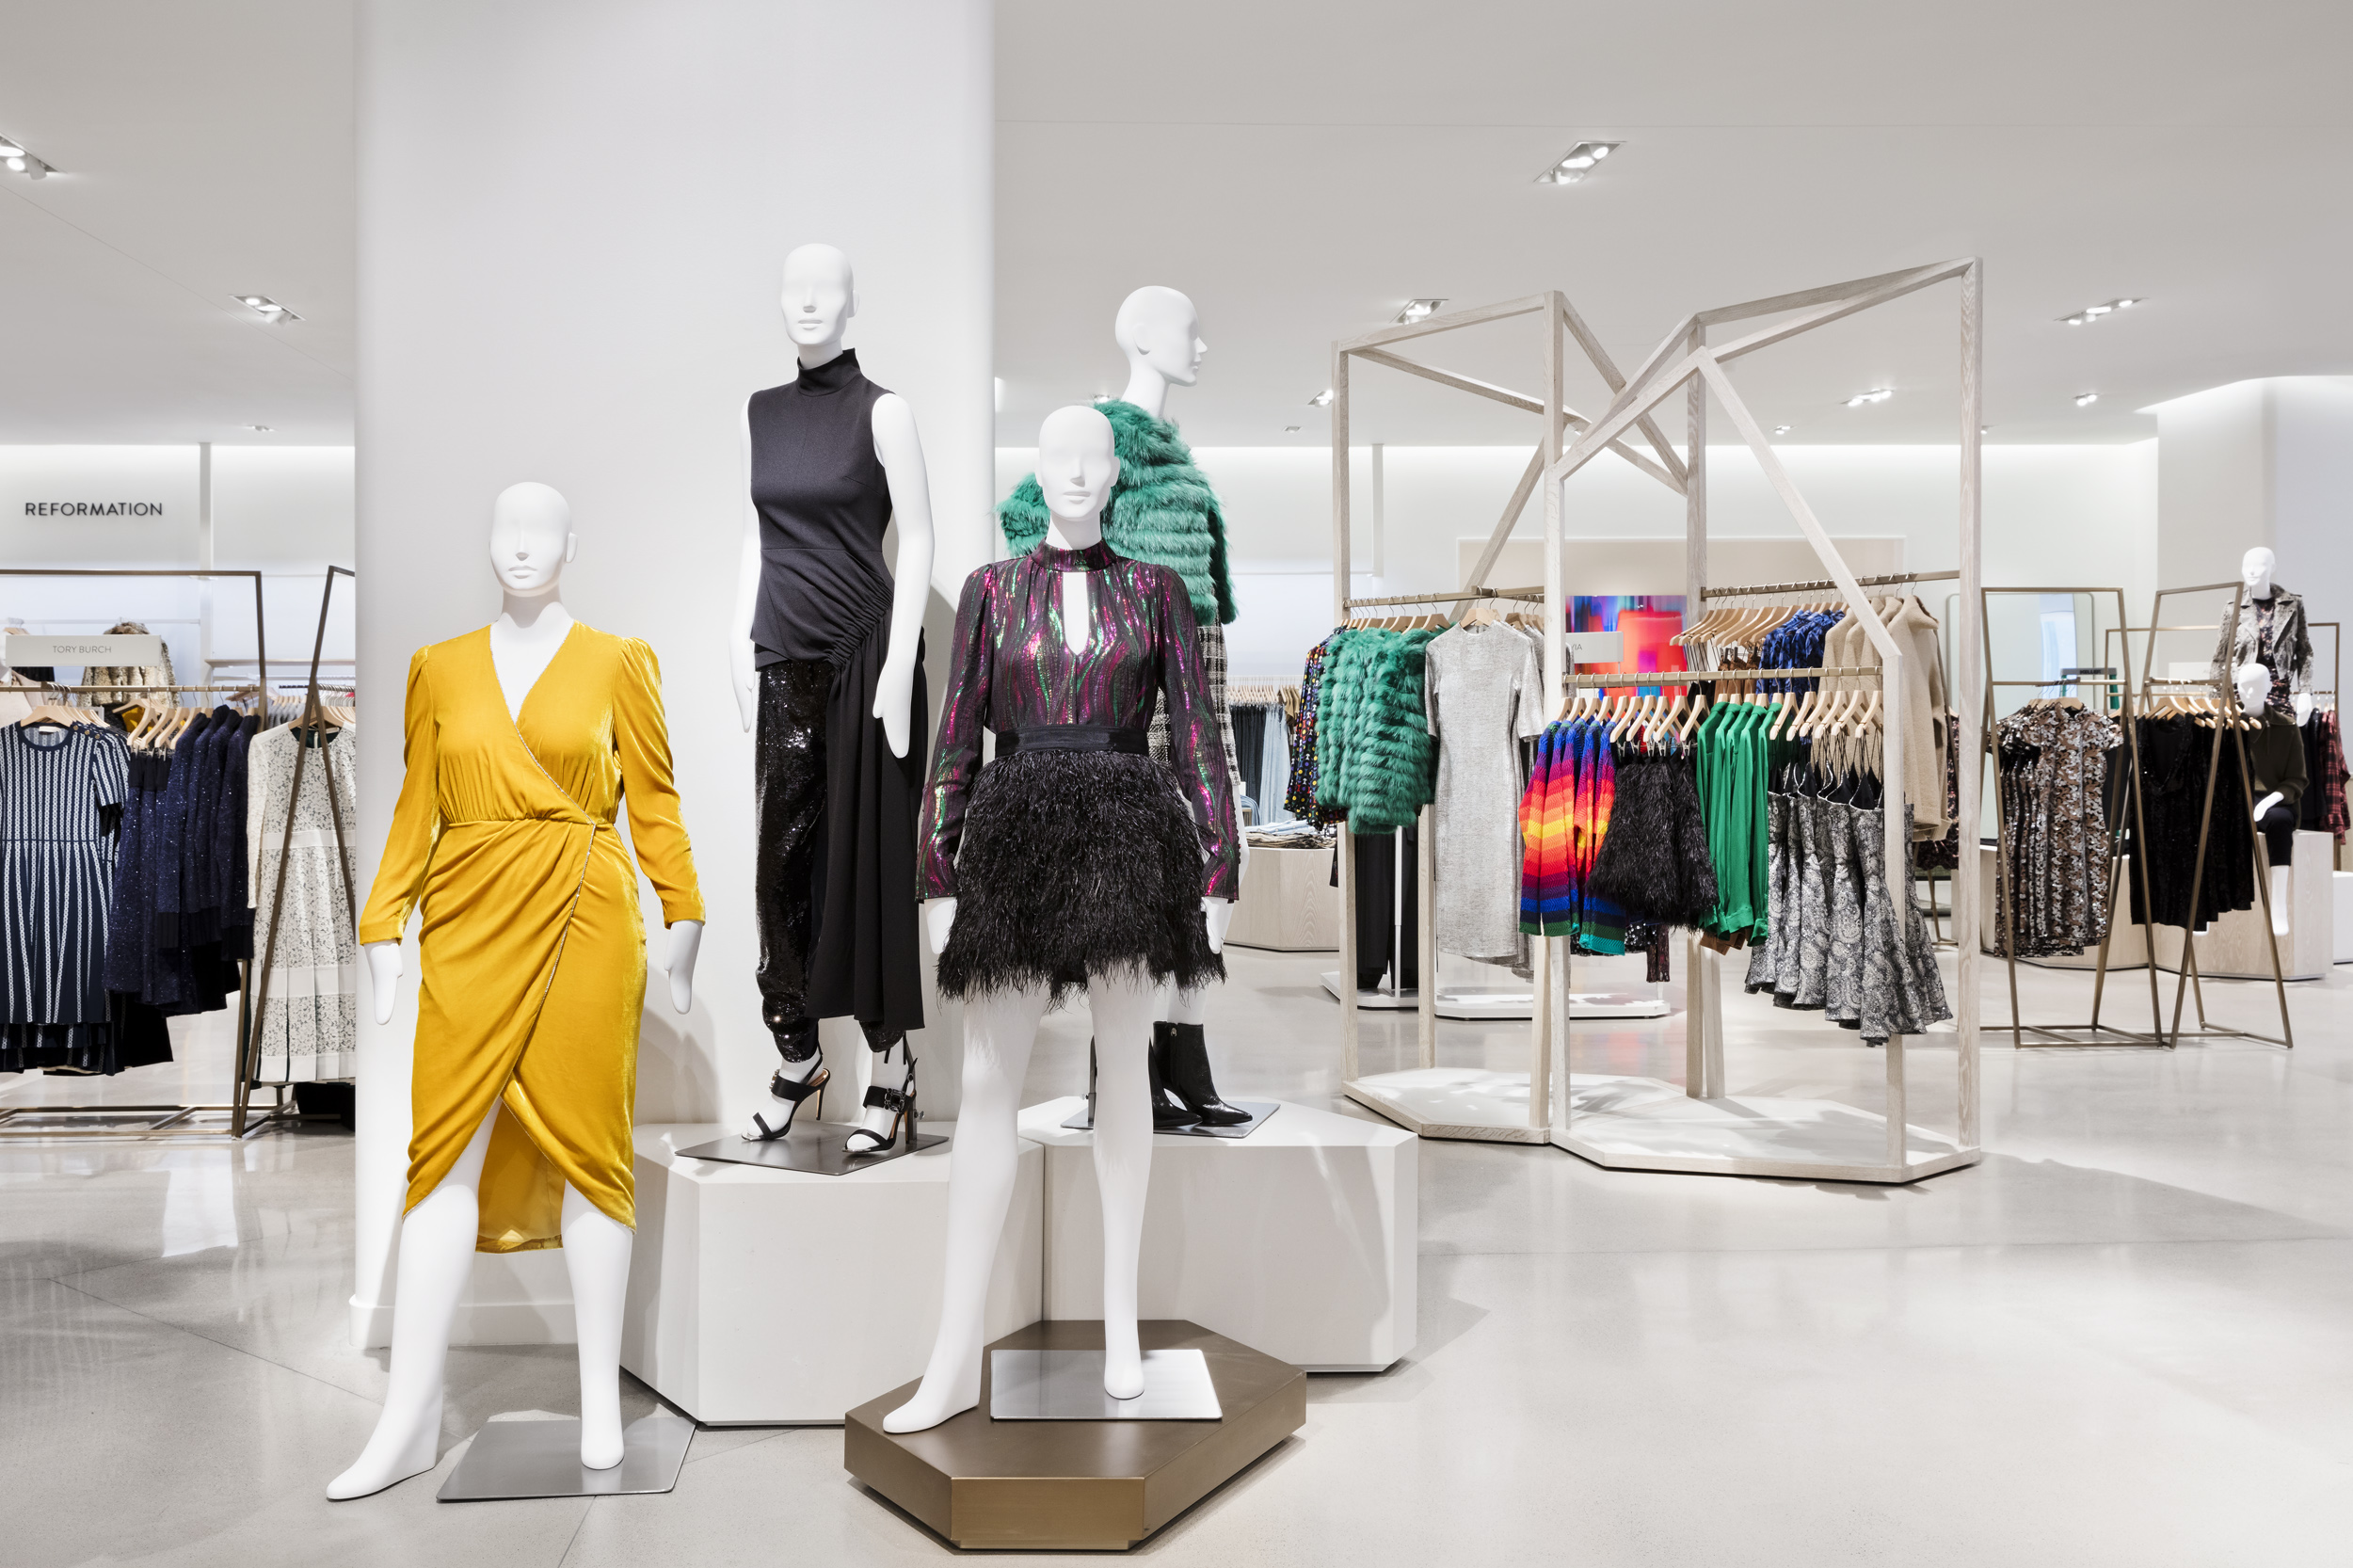 While Brick-and-Mortar Stores Struggle, Nordstrom Opens a NYC Flagship with  Chanel and More